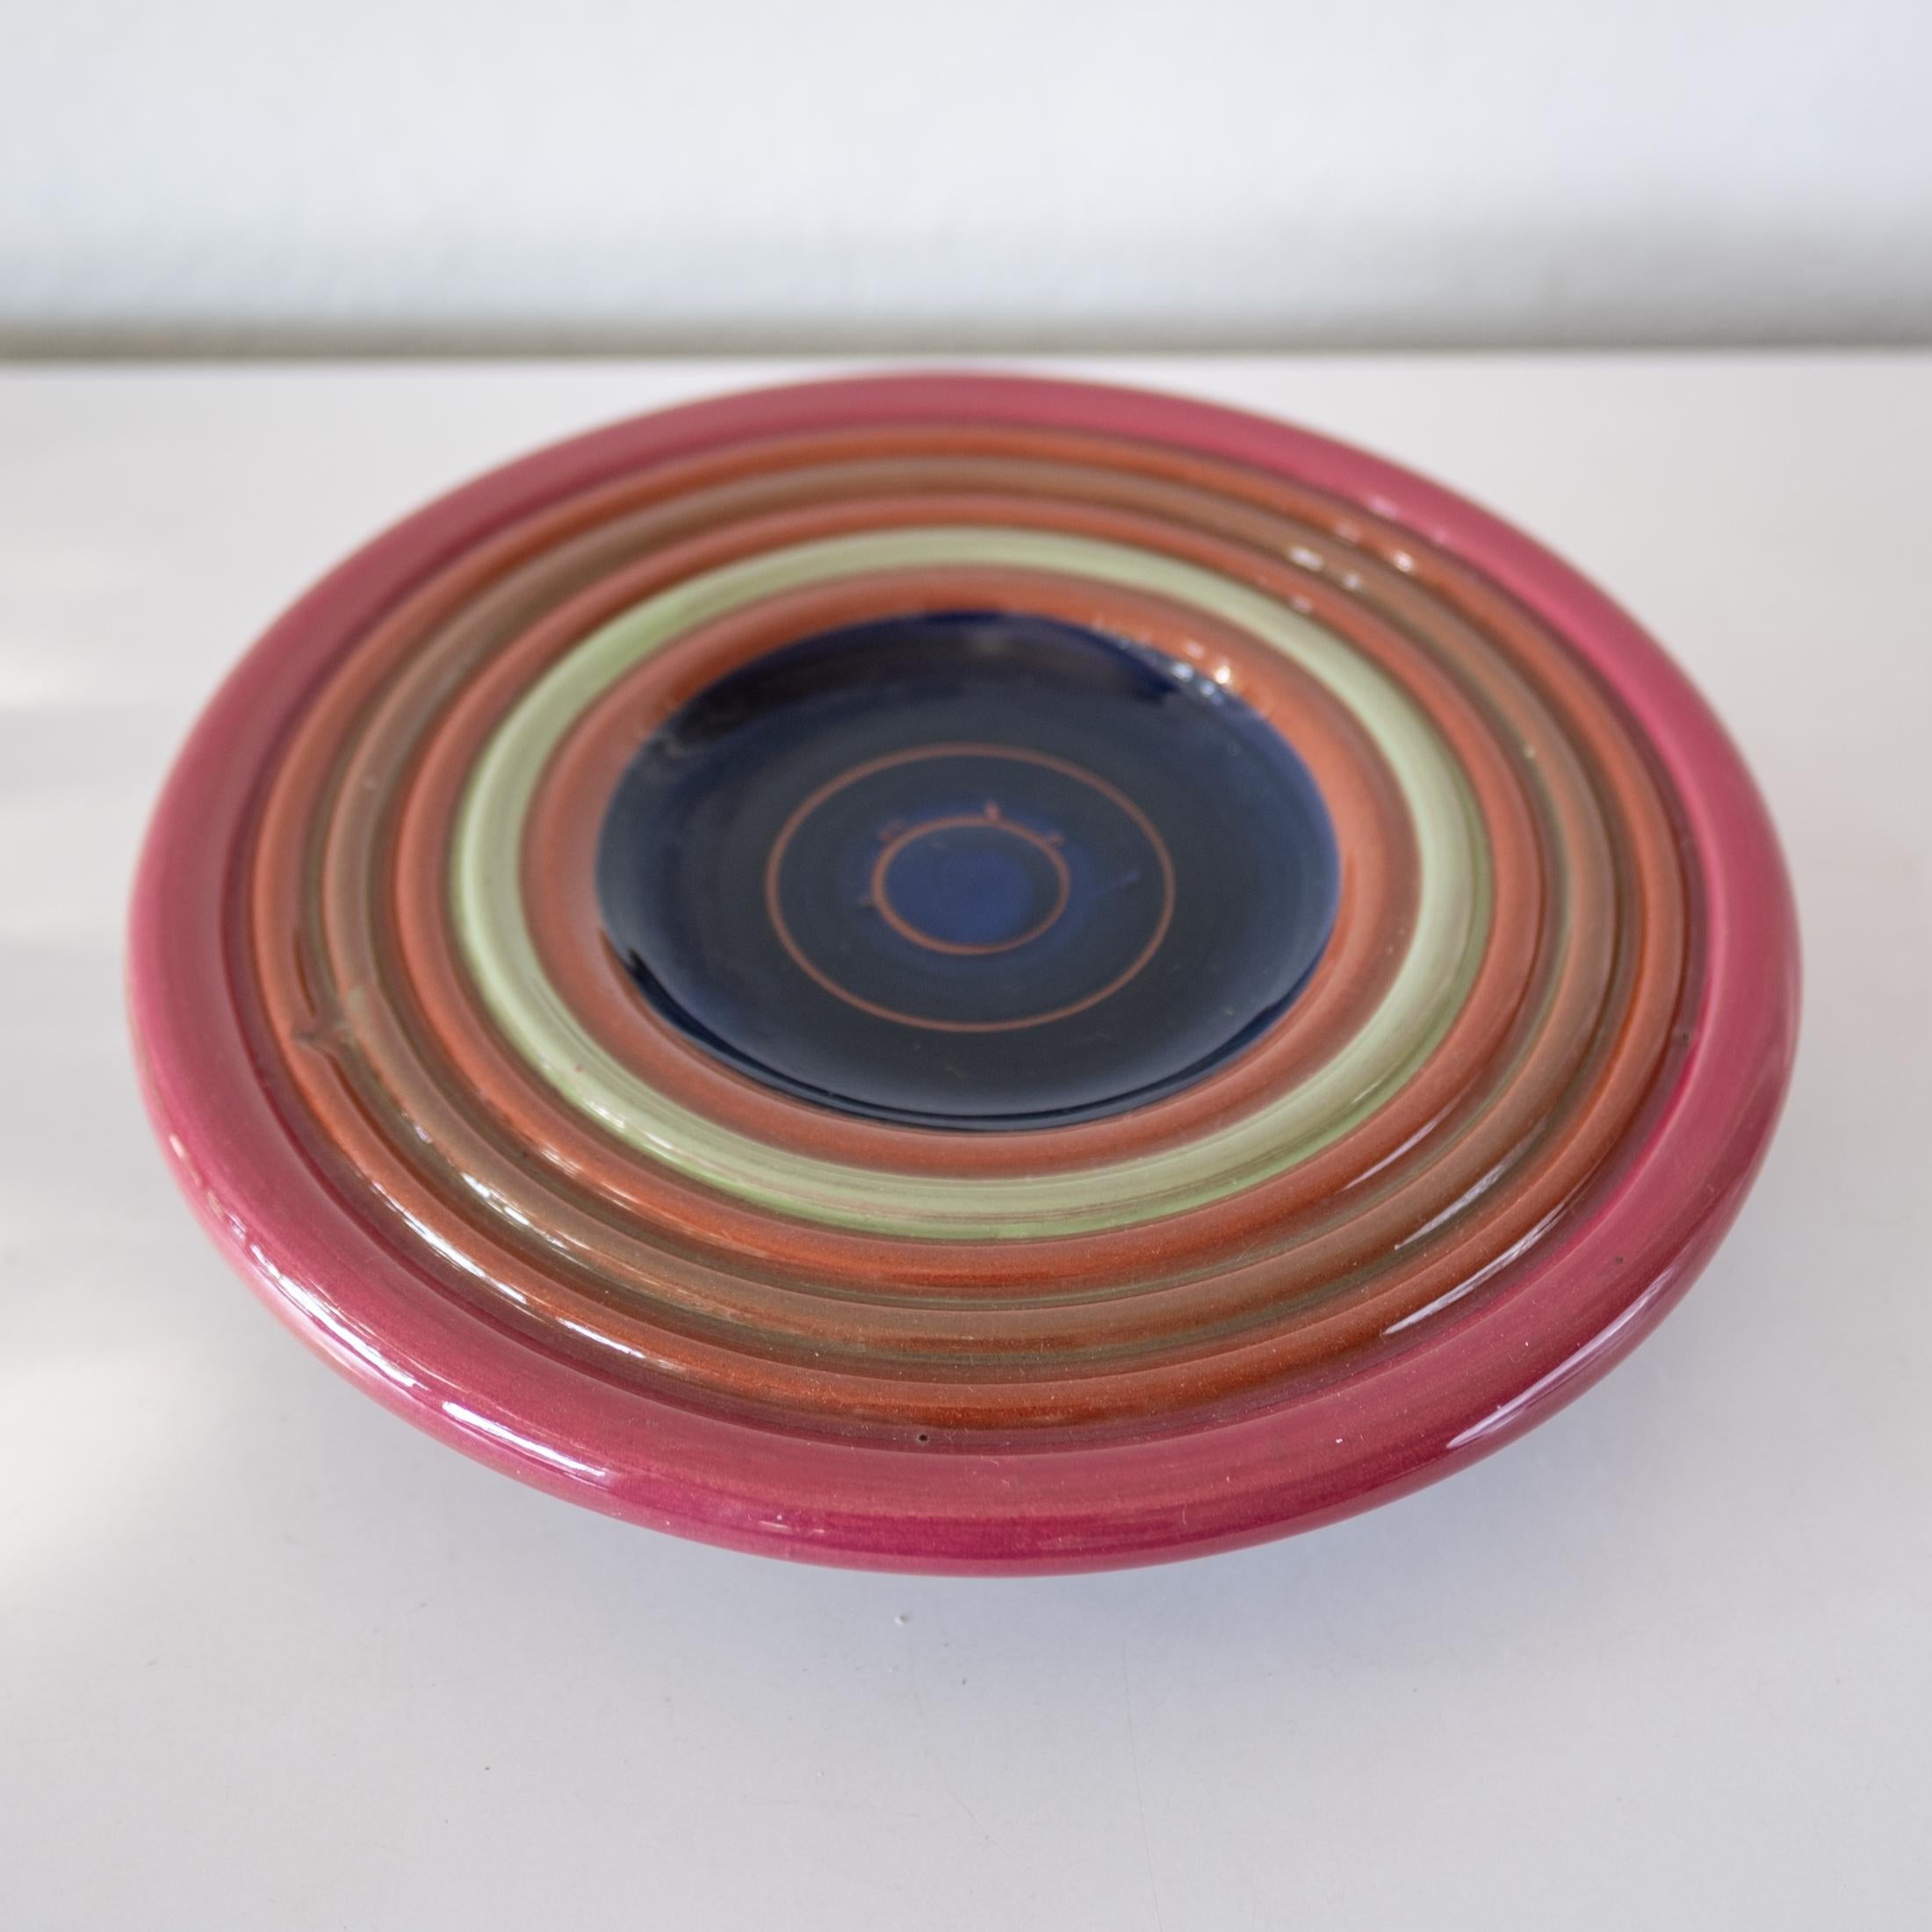 Peter Shire Ceramic EXP Pottery 1997 Compote Bowl In Good Condition For Sale In San Diego, CA